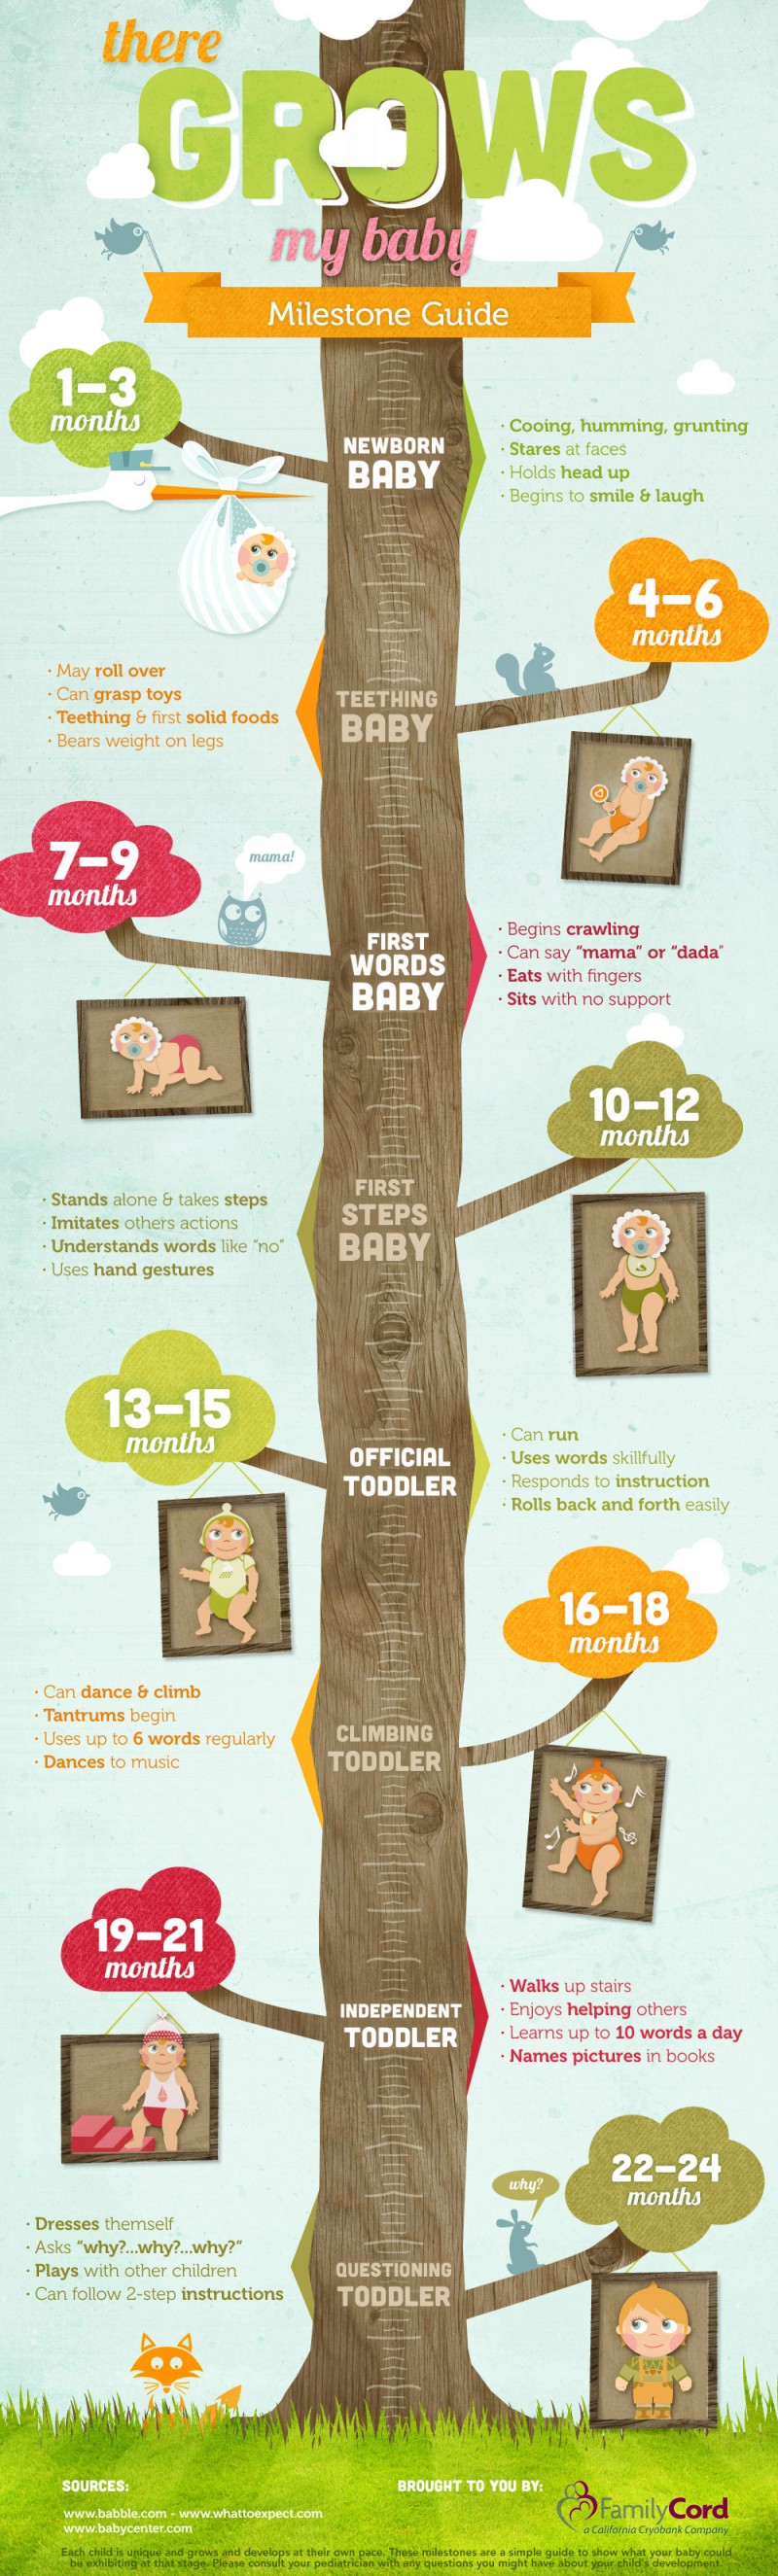 There Grows My Baby! Milestone Guide [Infographic]